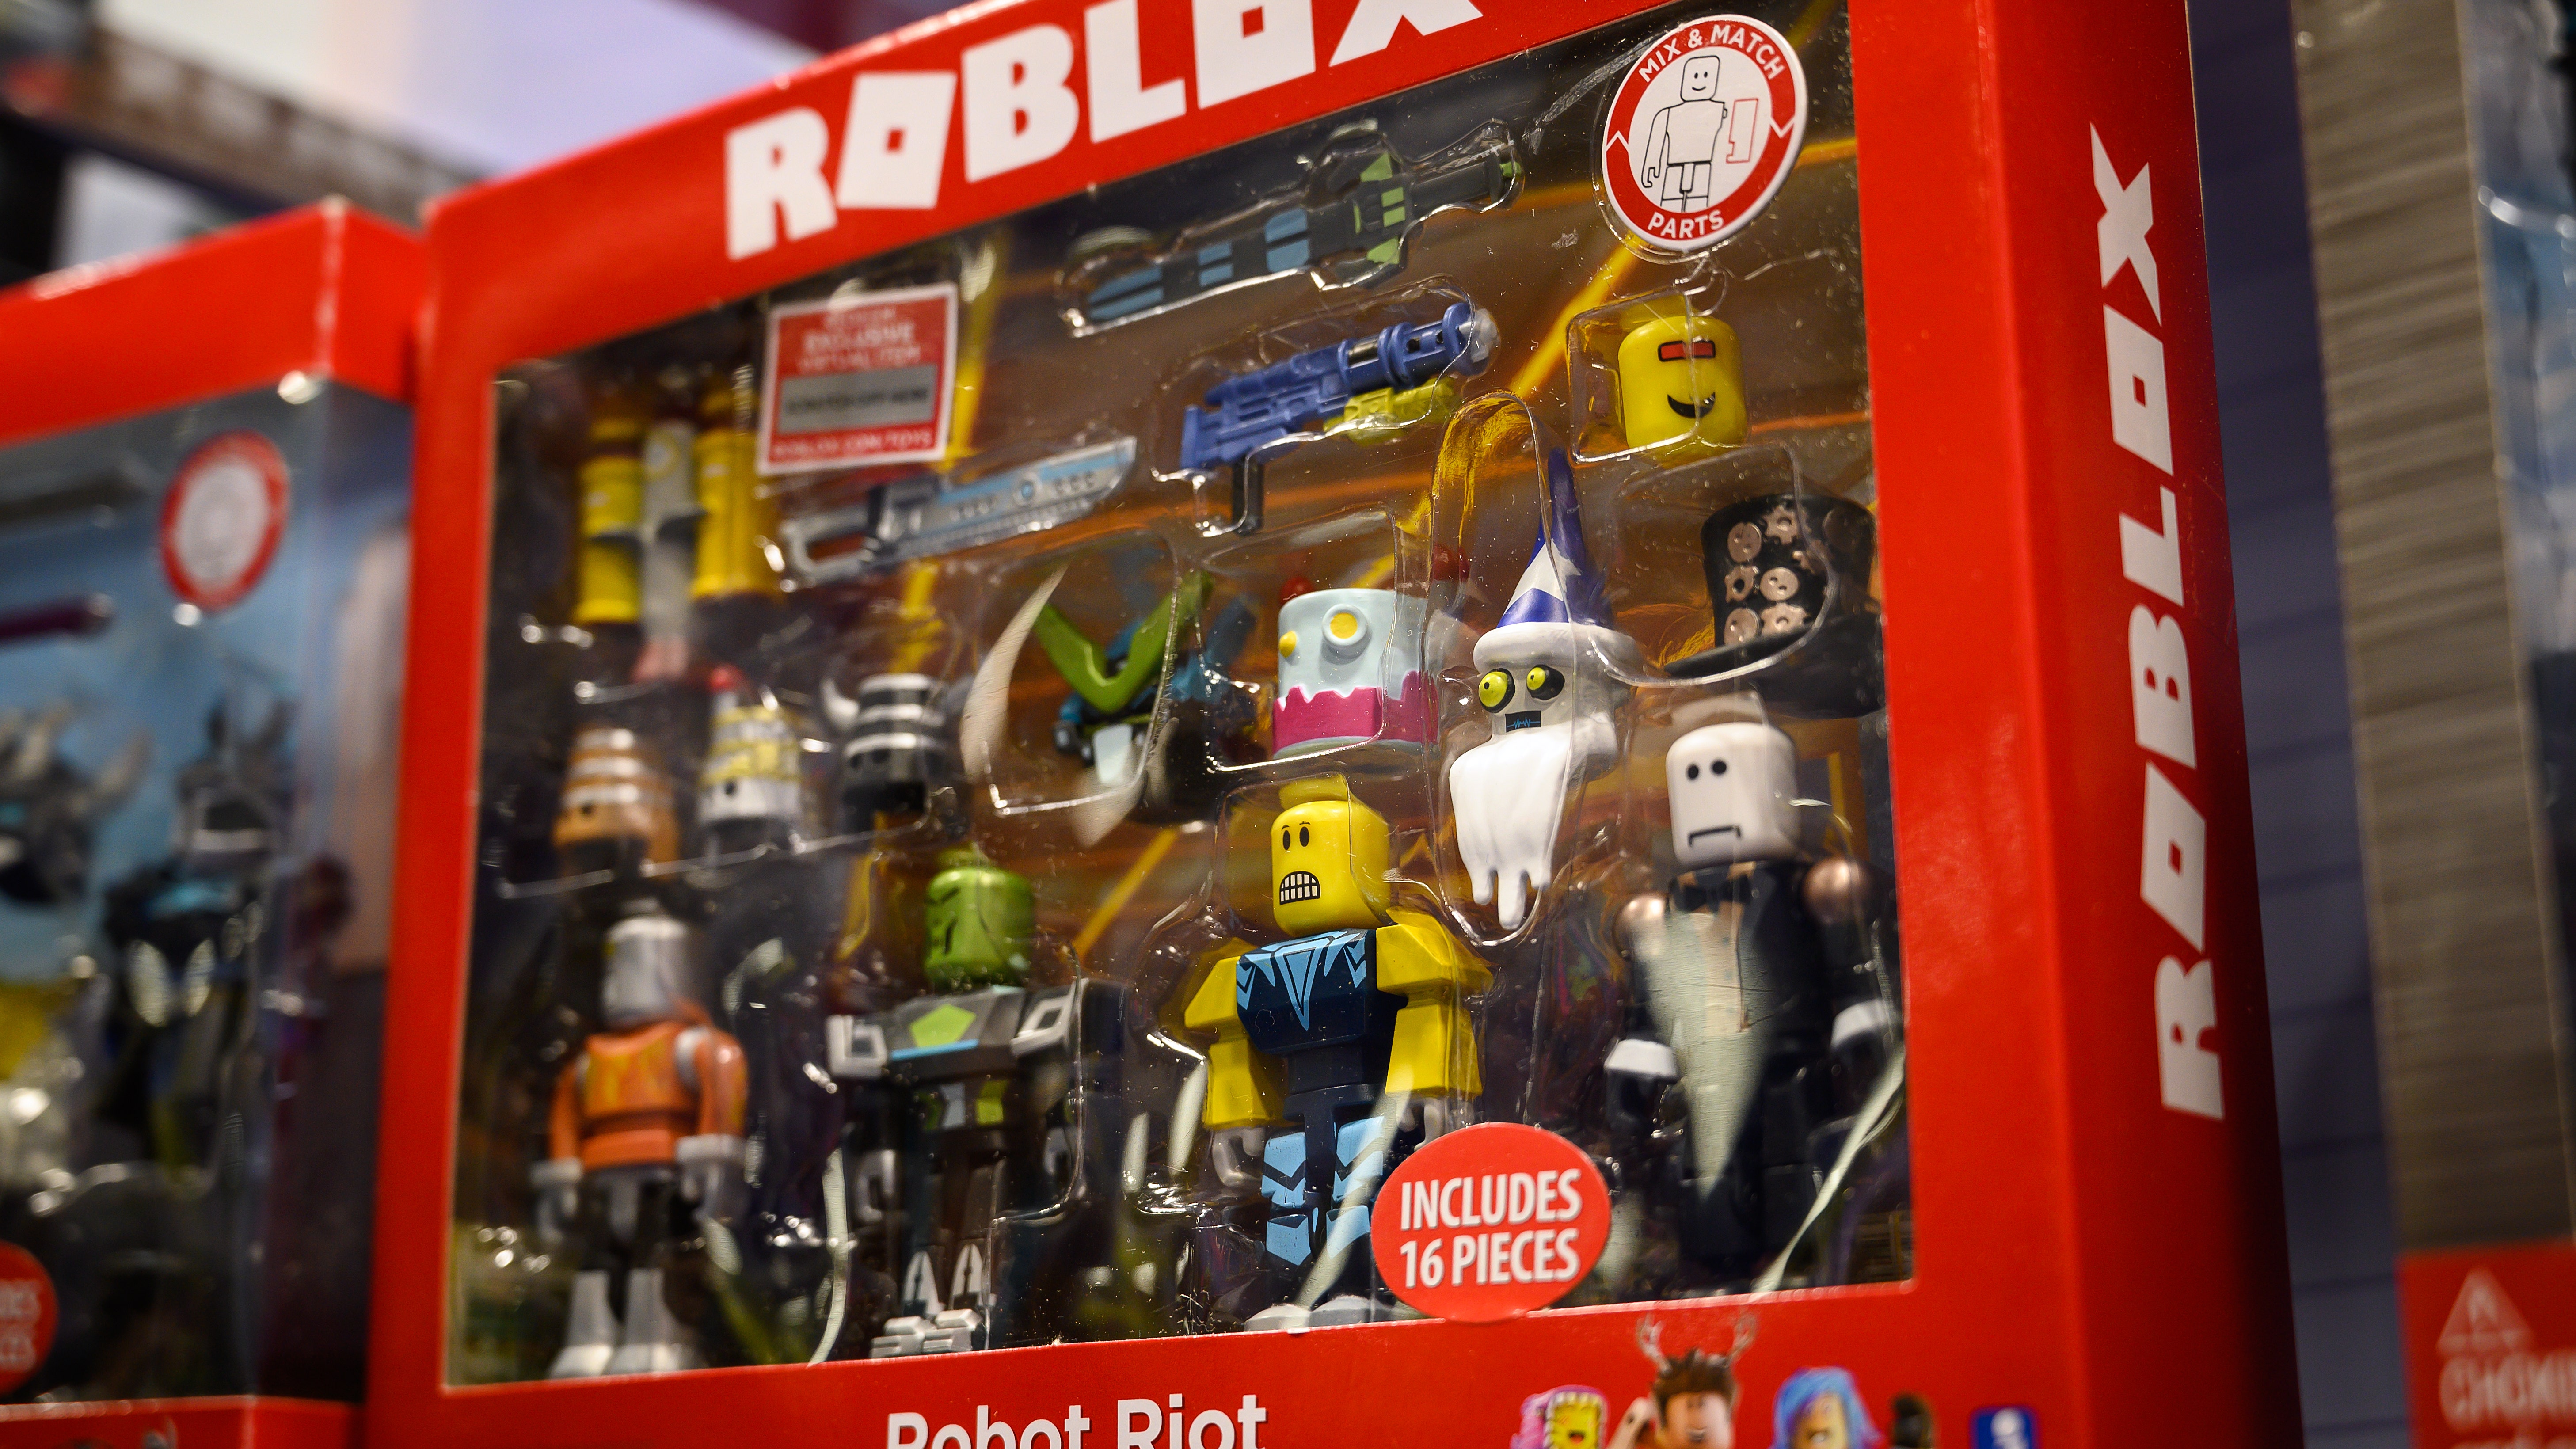 Convert Your Real Bucks to Robux When You Grab $10 Roblox Gift